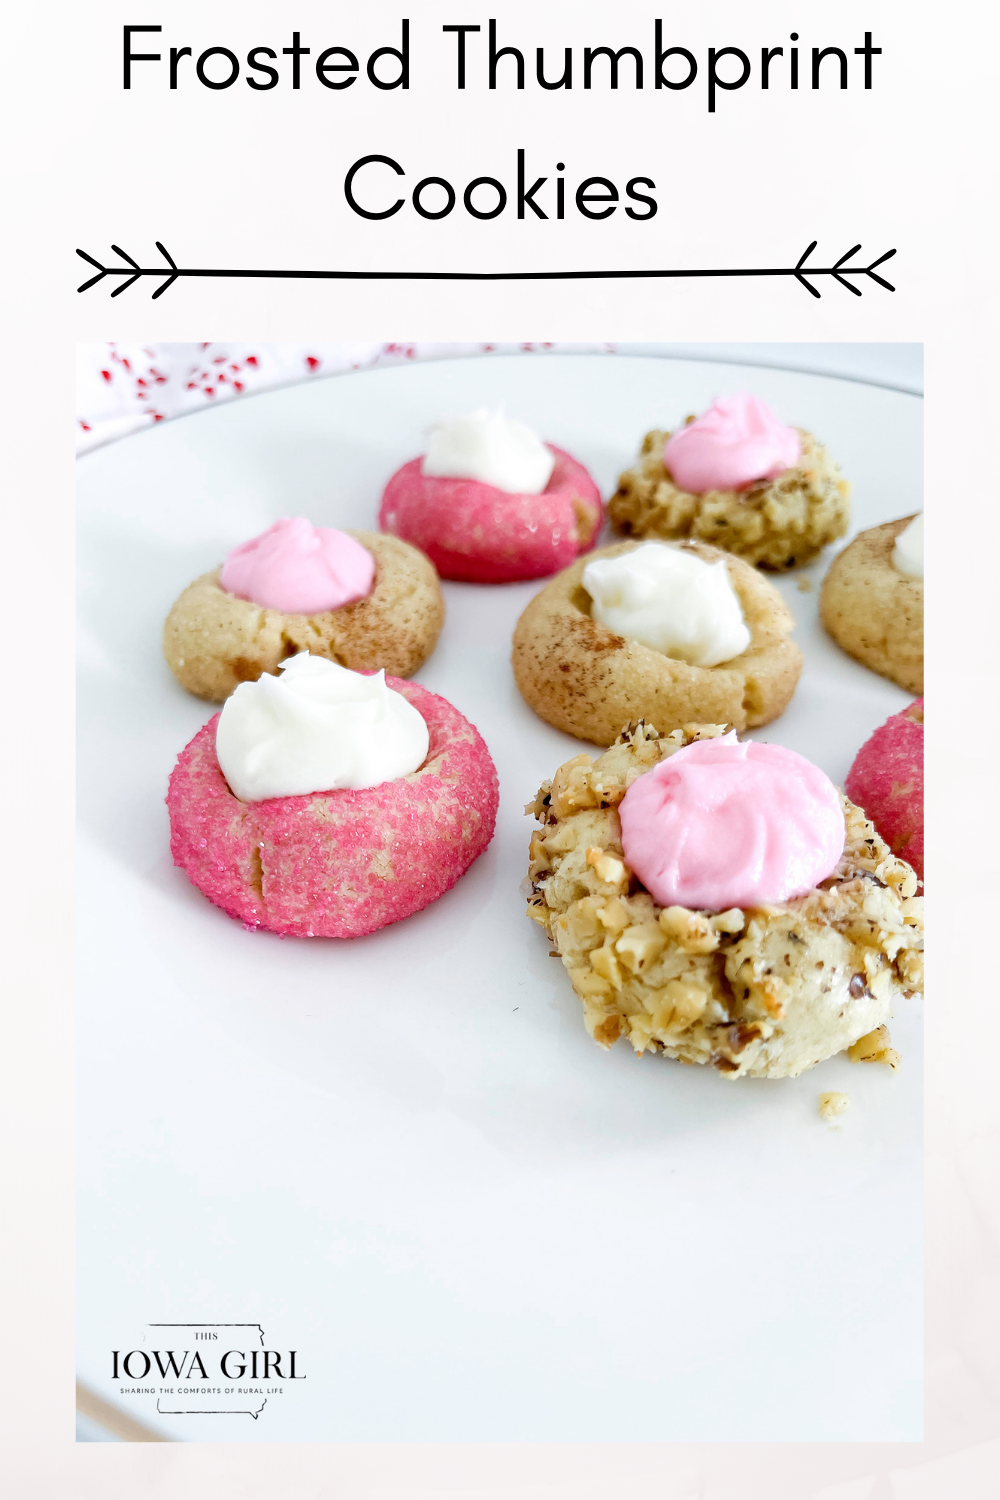 thisiowagirl - Frosted Thumbprint Cookies